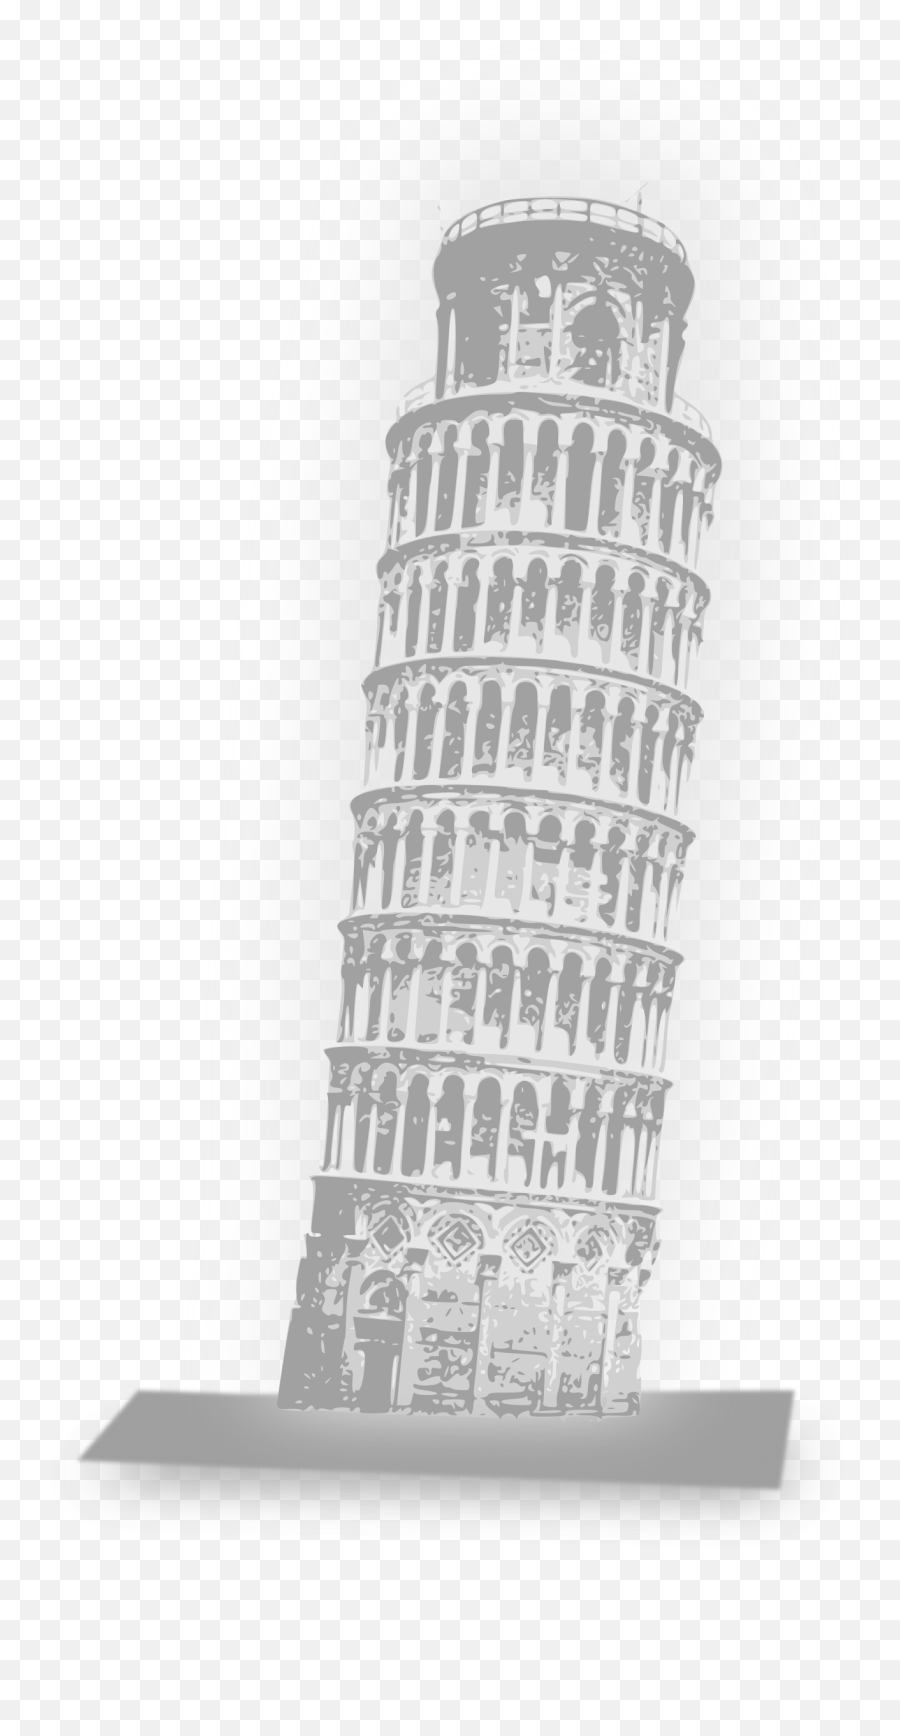 Leaning Tower Of Pisa Png Image - Piazza Dei Miracoli,Leaning Tower Of Pisa Png